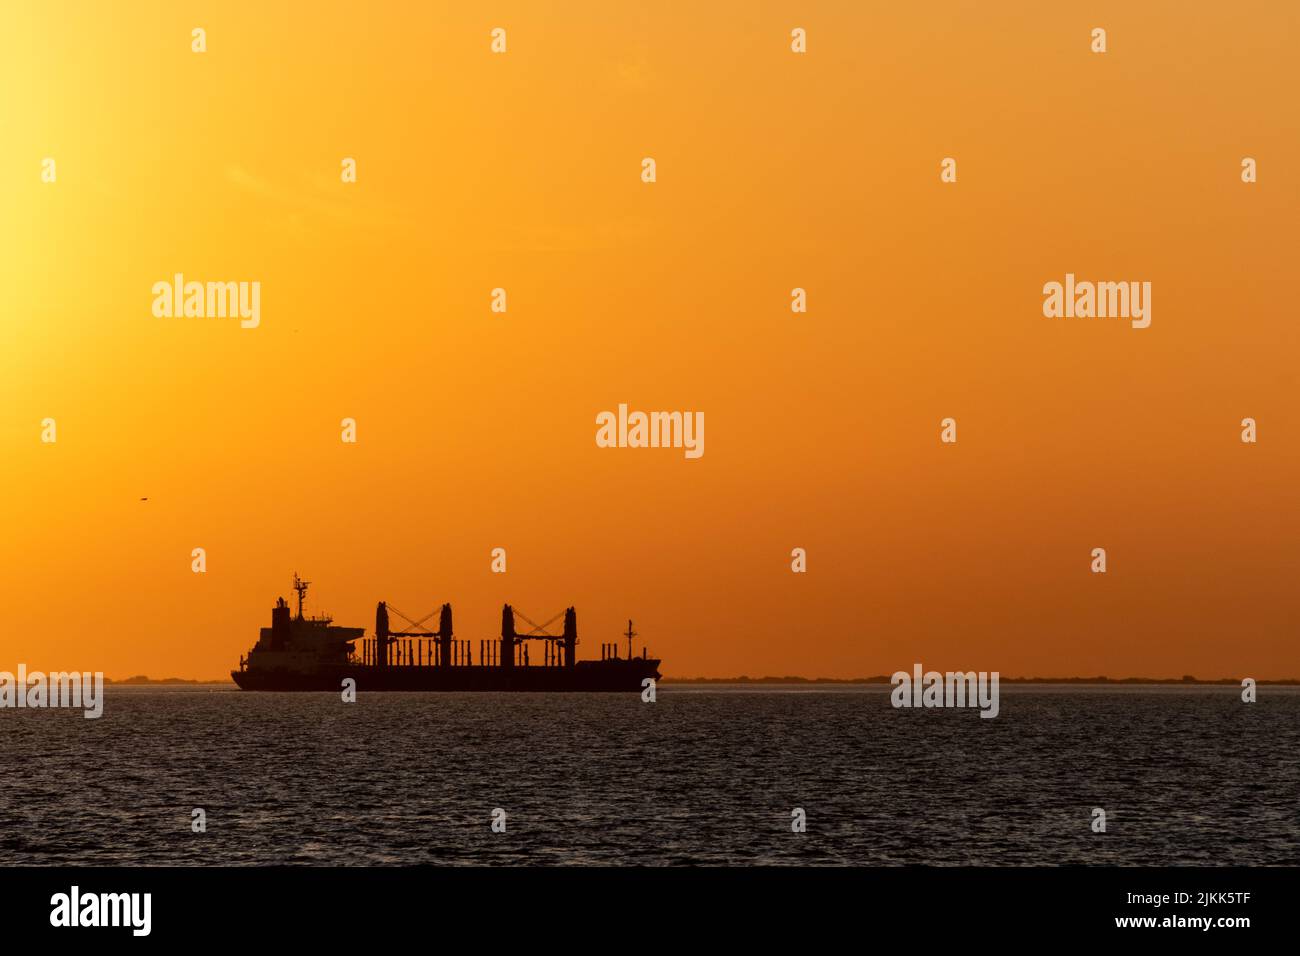 A big cargo ship, a small boat and an old pier can be seen at Uruguay River, Conchillas, Uruguay Stock Photo